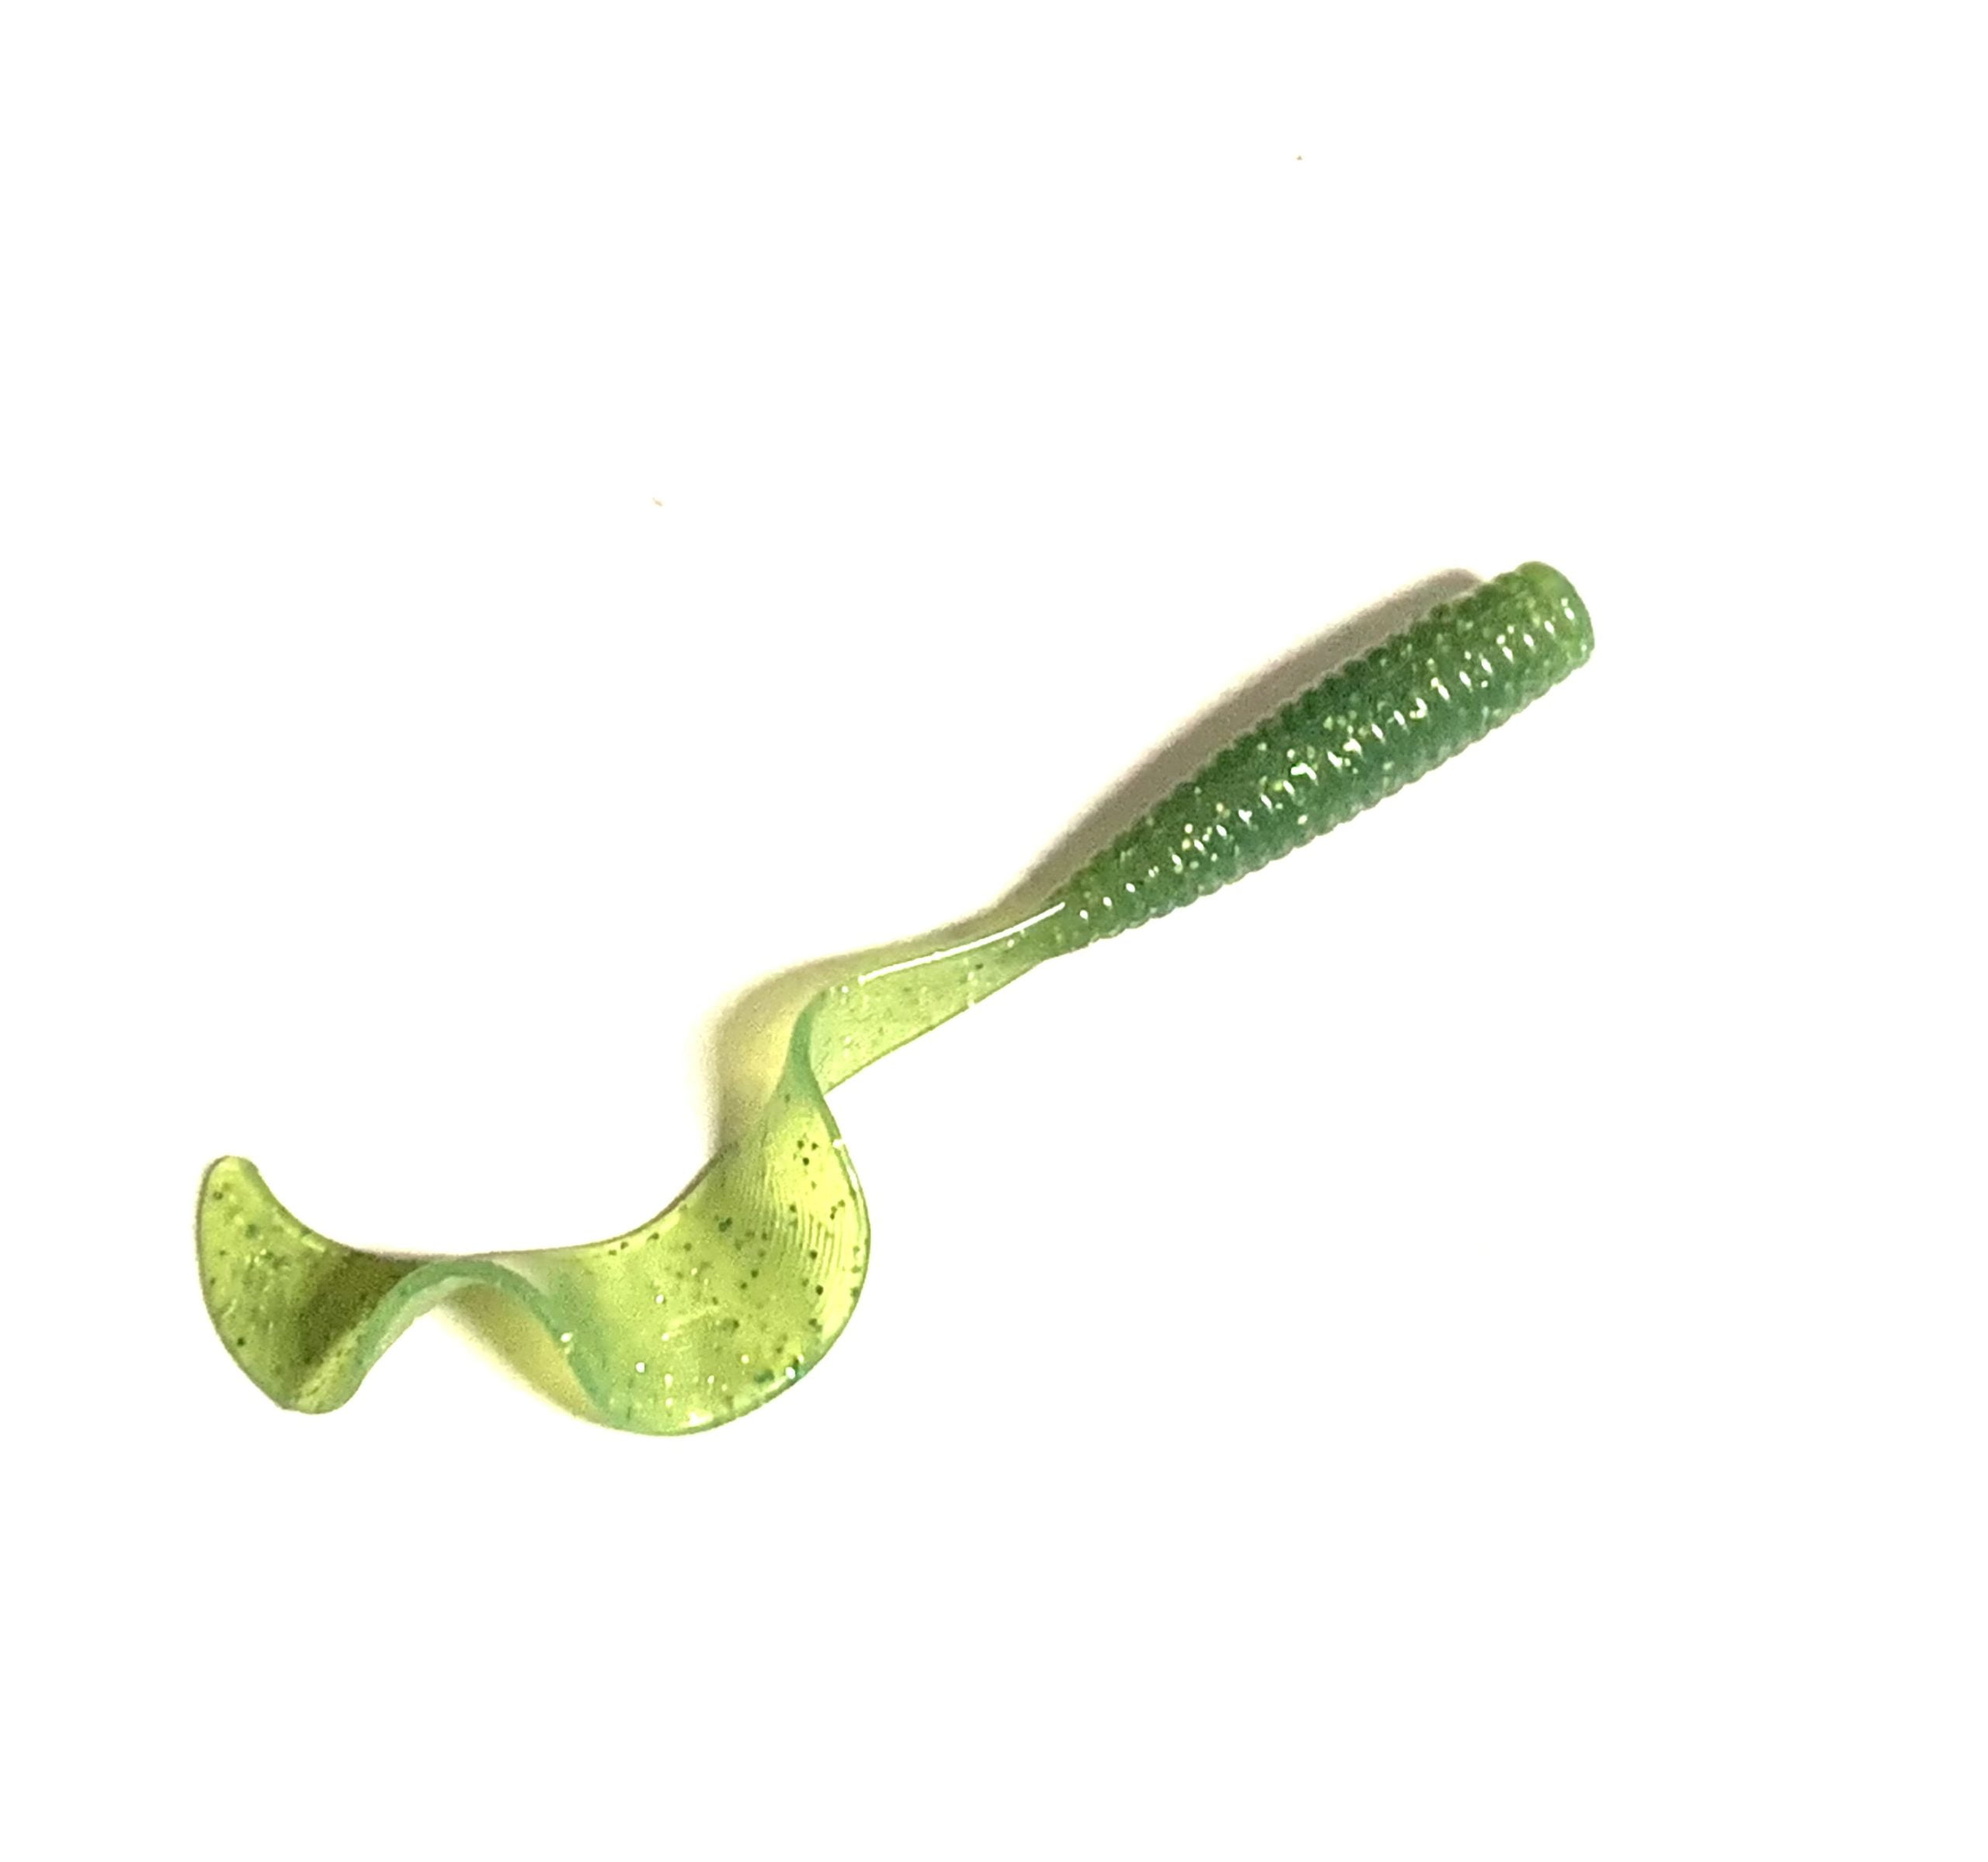 Ding O' Ling 8 Twister Bomb! Curly Tail Grub – Horker Soft Baits